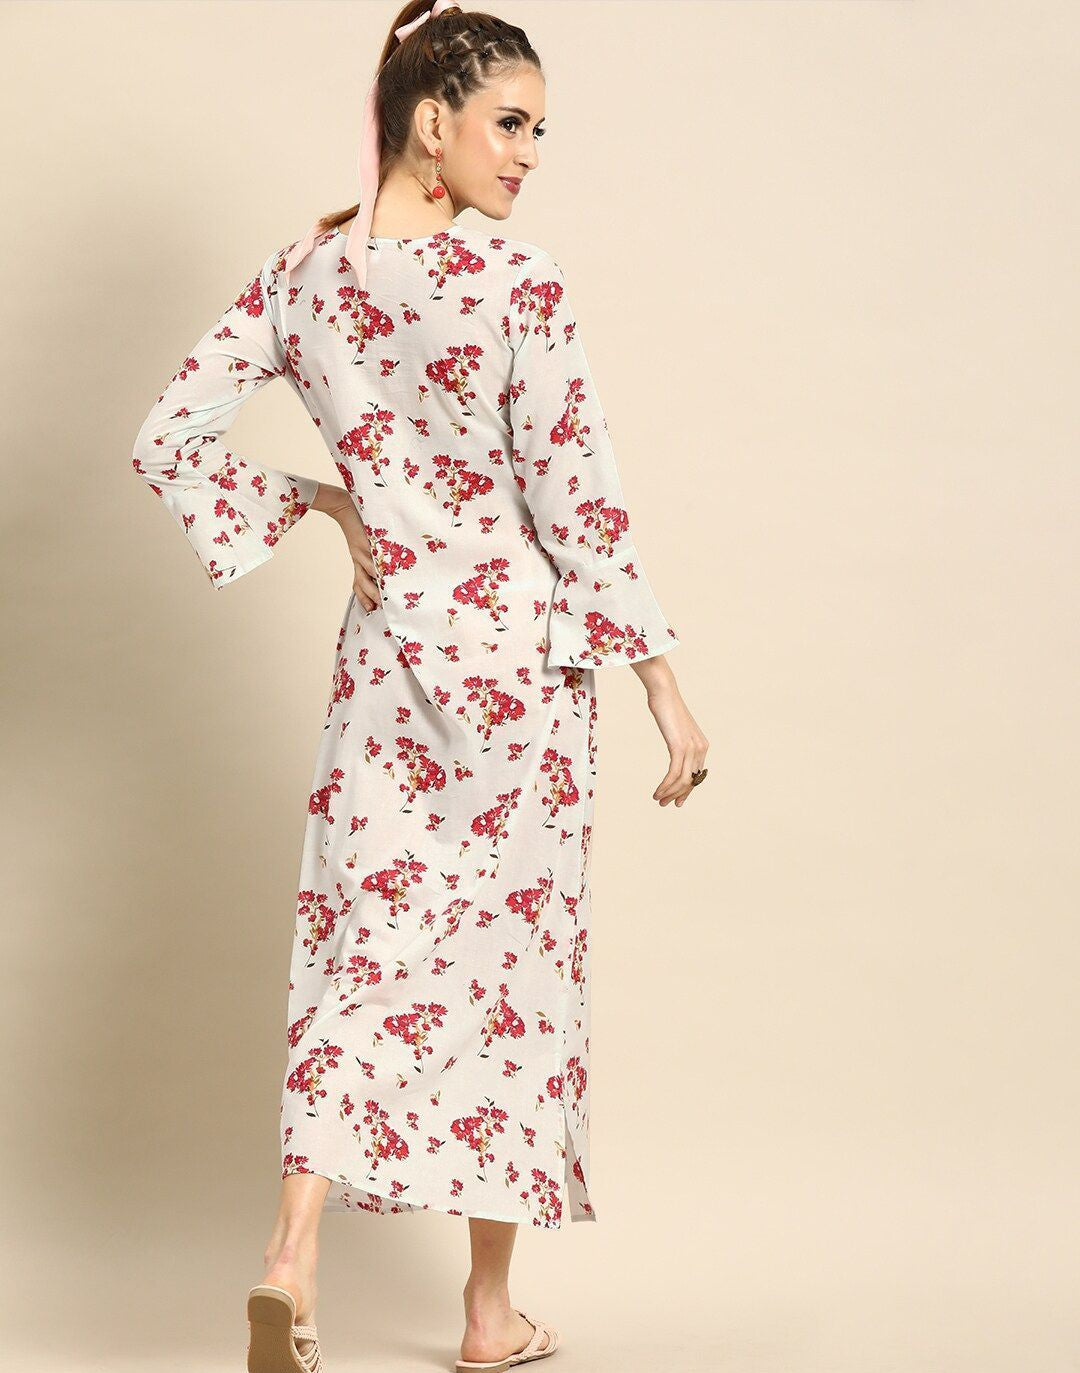 Off-White & Pink Printed Maxi Dress